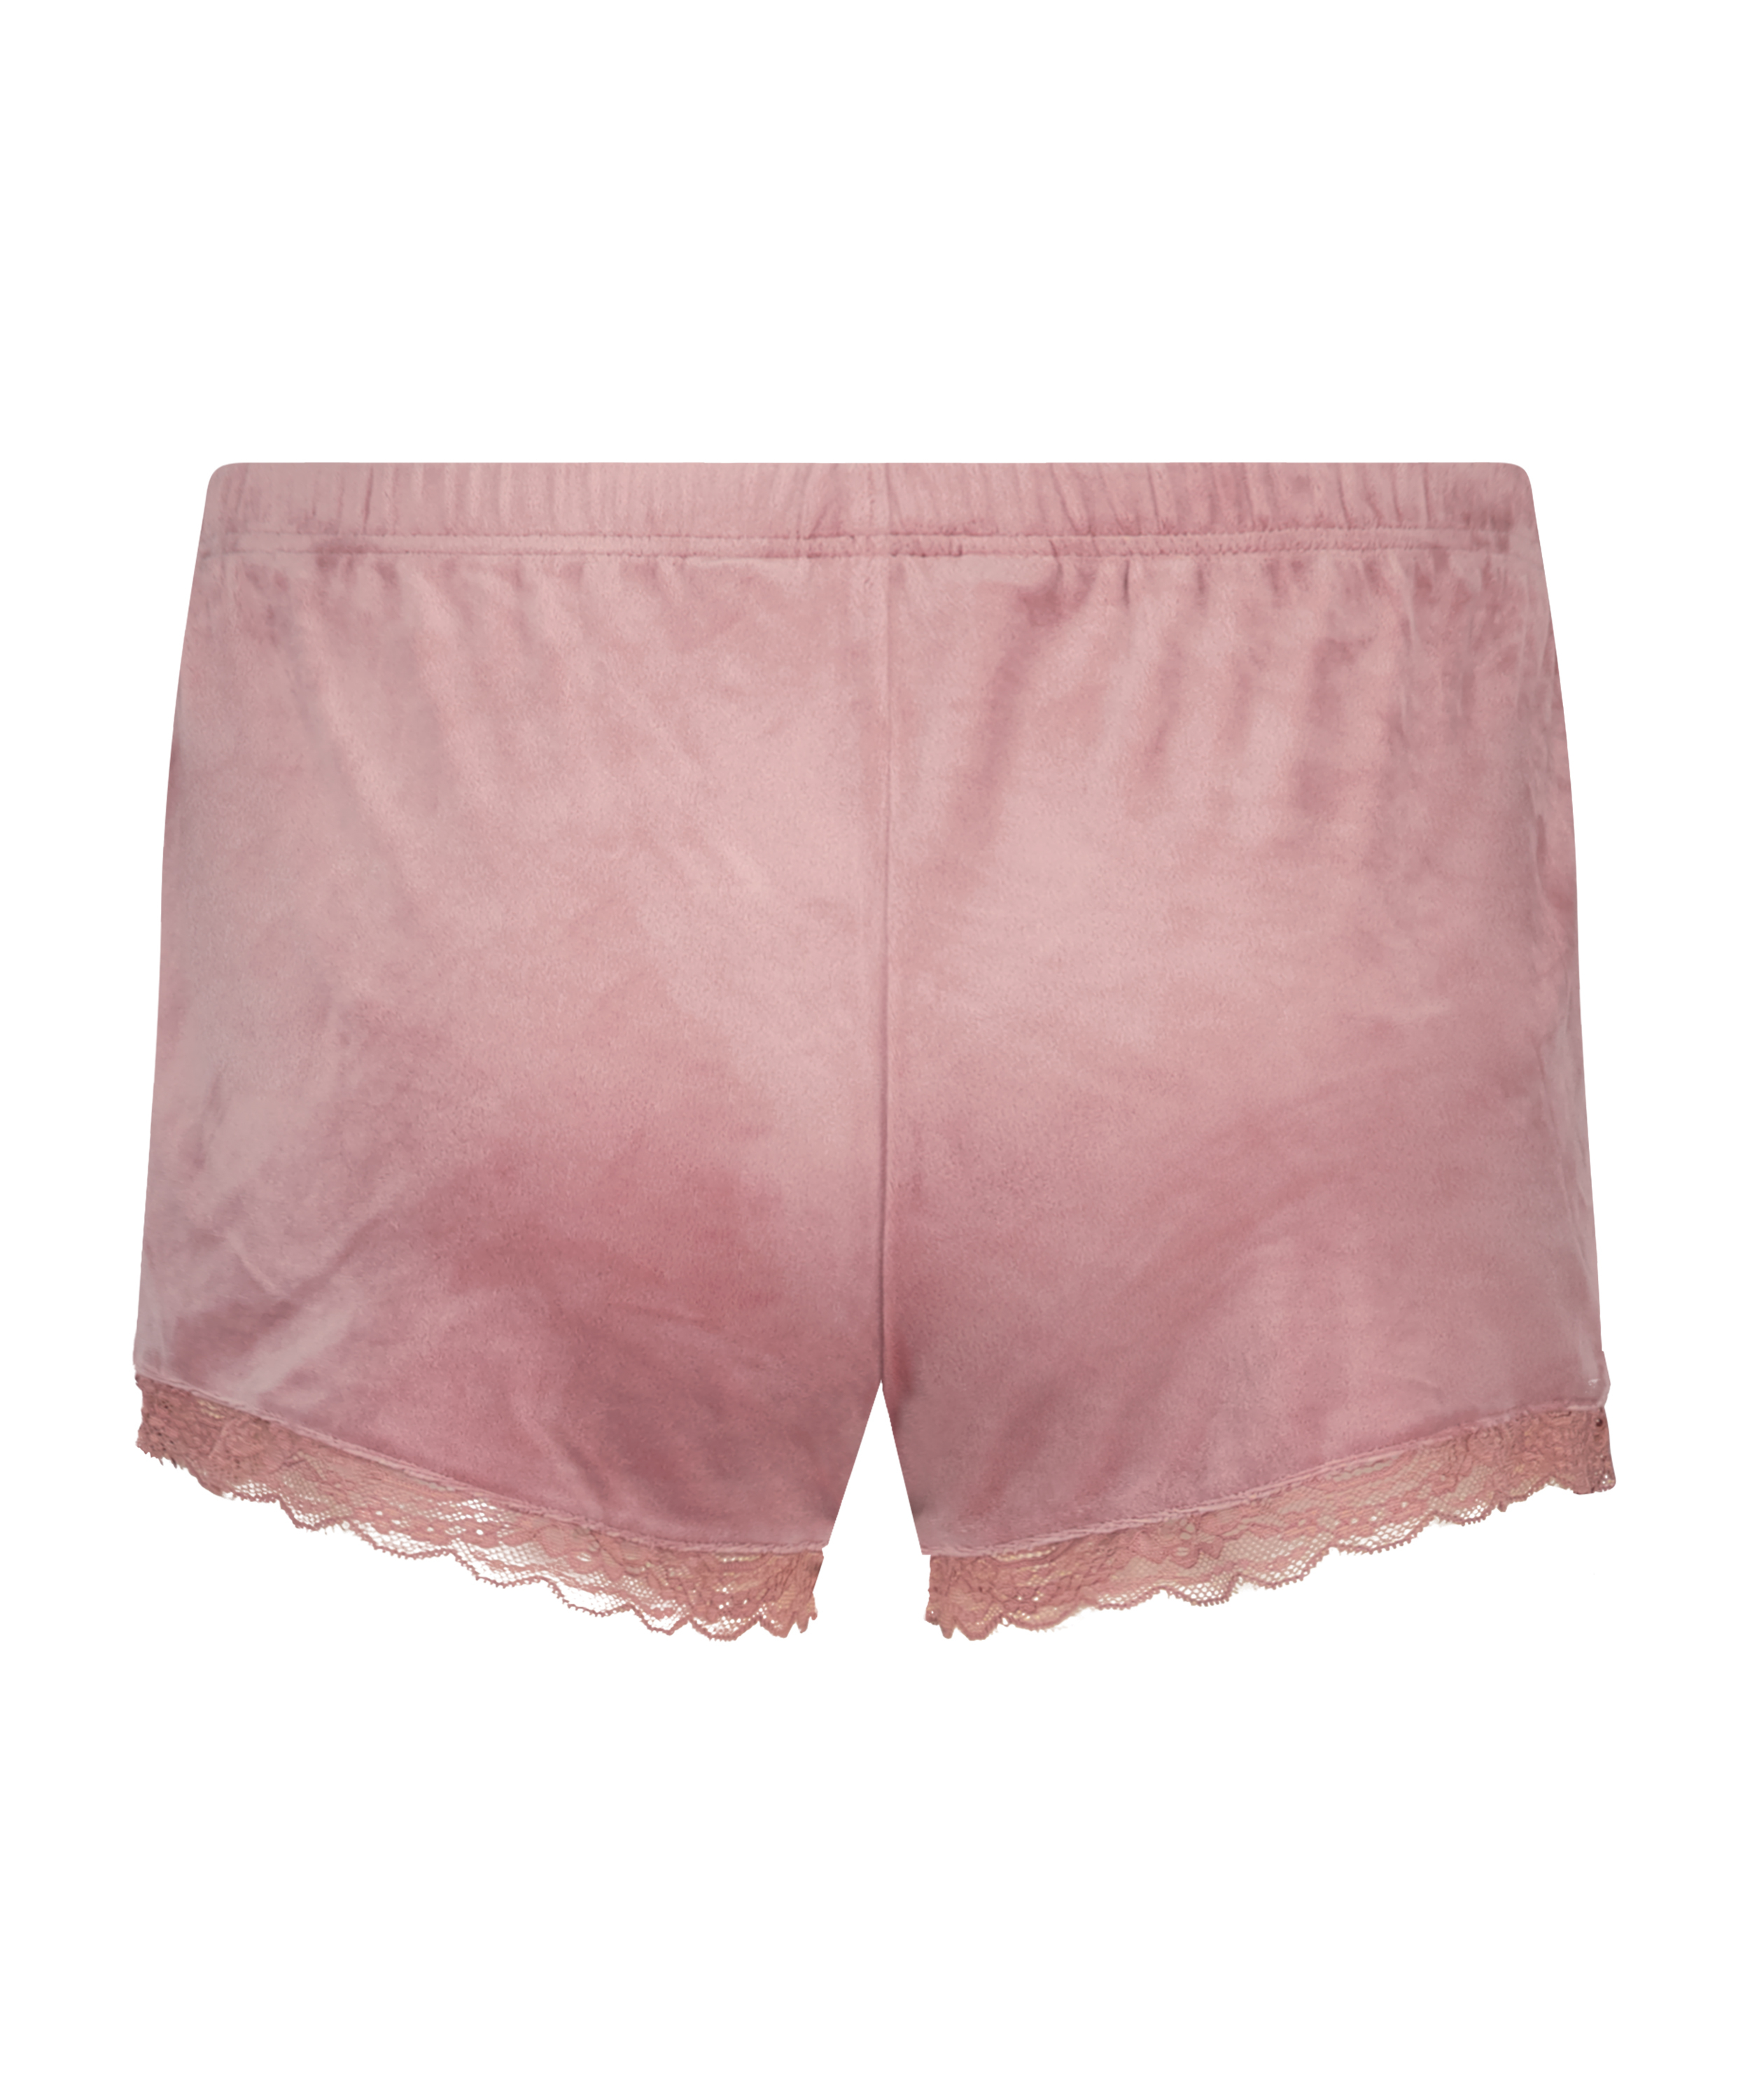 Velours Lace shorts, pink, main